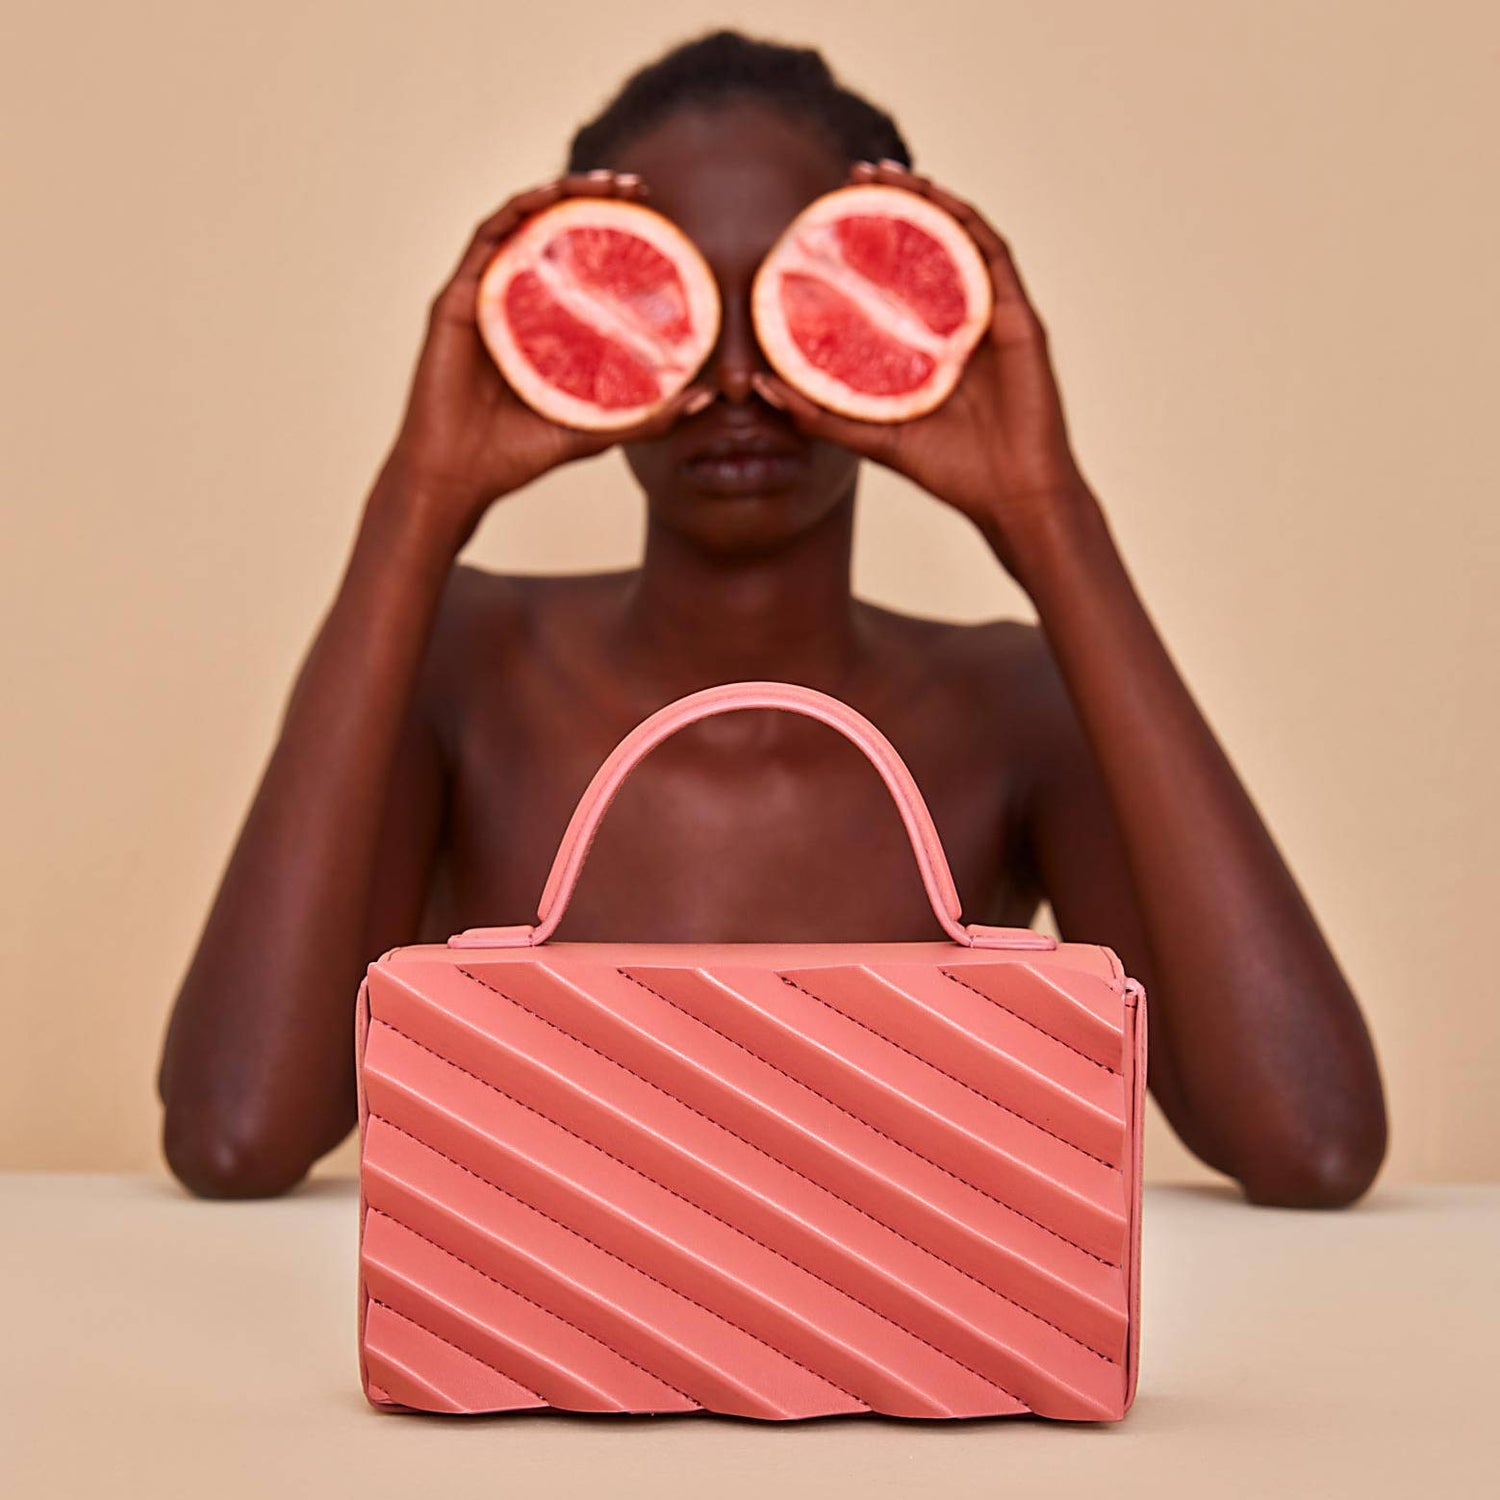 A pink handbag is displayed, with a woman in the background placing grapefruit slices playfully over her eyes. 